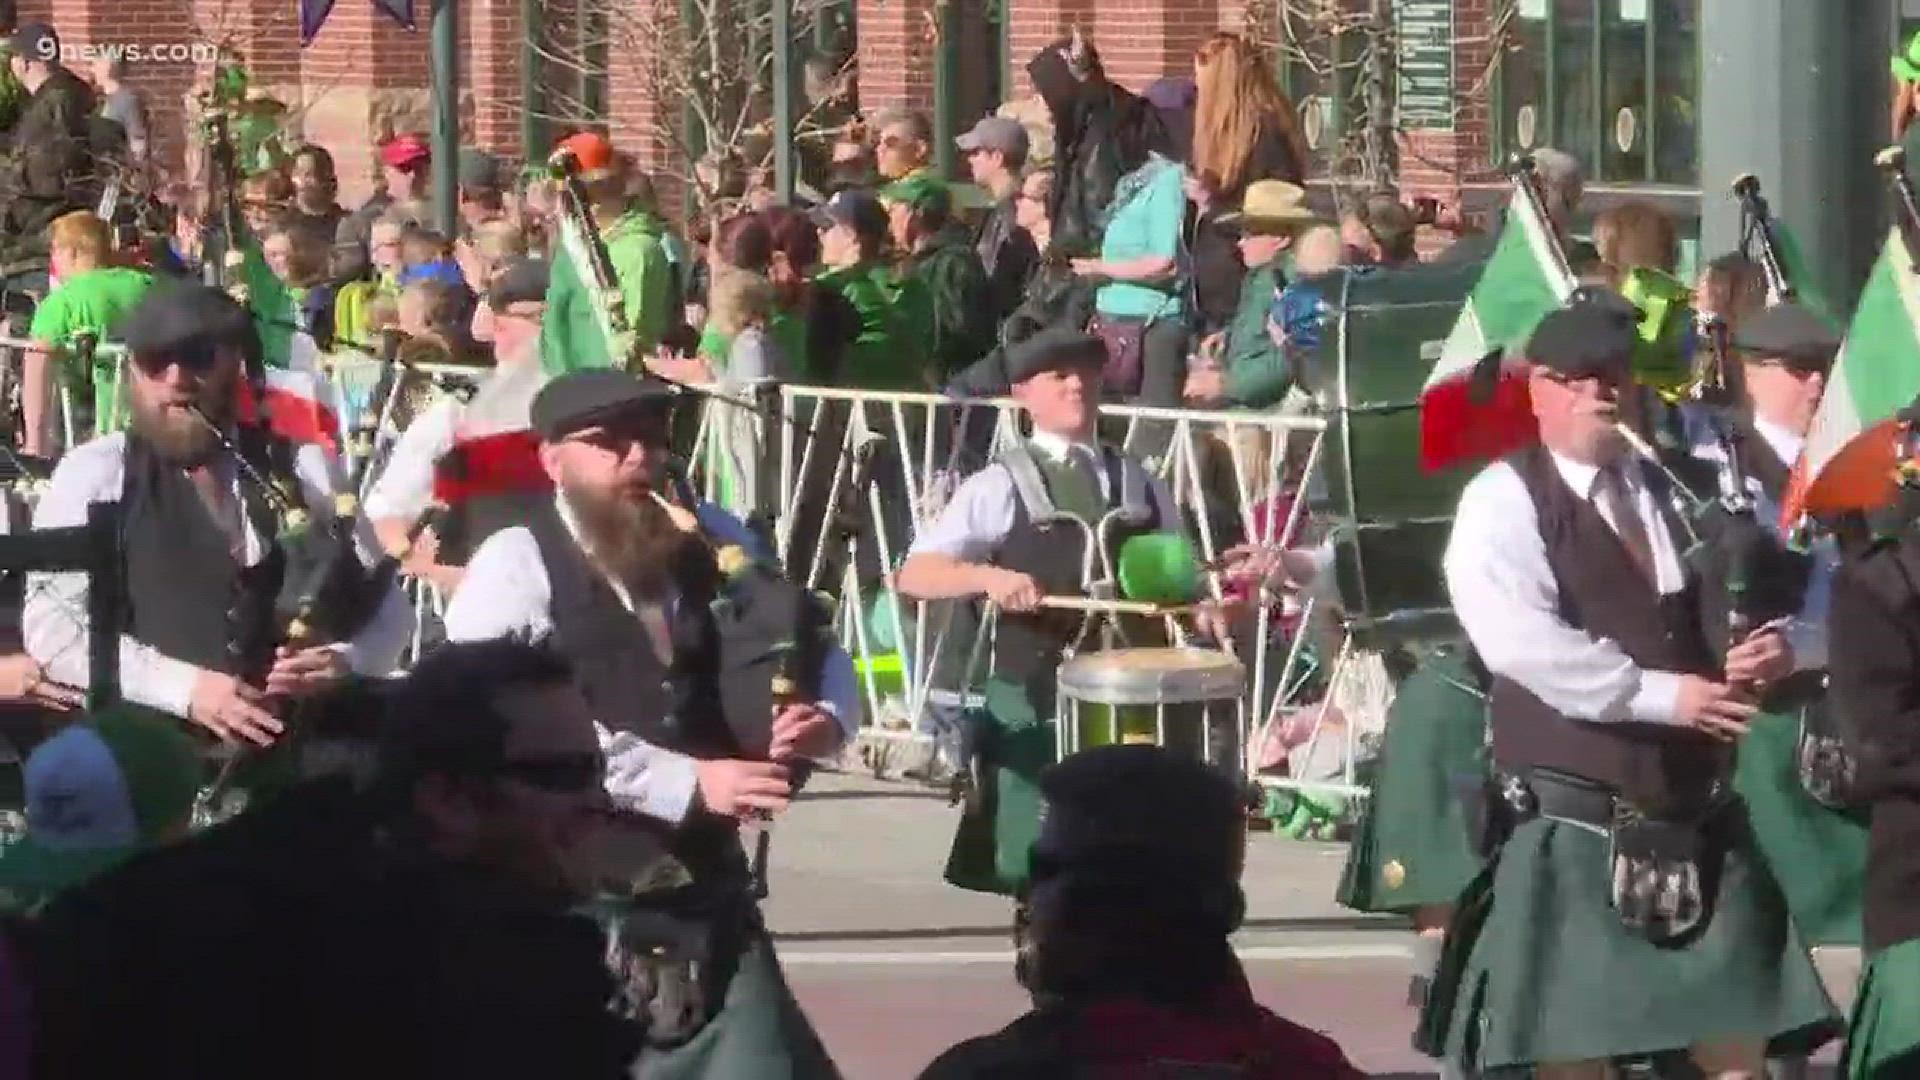 So a lot of cities actually don't have a St. Patrick's Day parade - and the fact that we've had one for the last 50 years is really lucky. More so, however, it's thanks to the dedication of volunteers that put it on. And, this year, we're the largest parade in the U.S. west of the Mississippi.